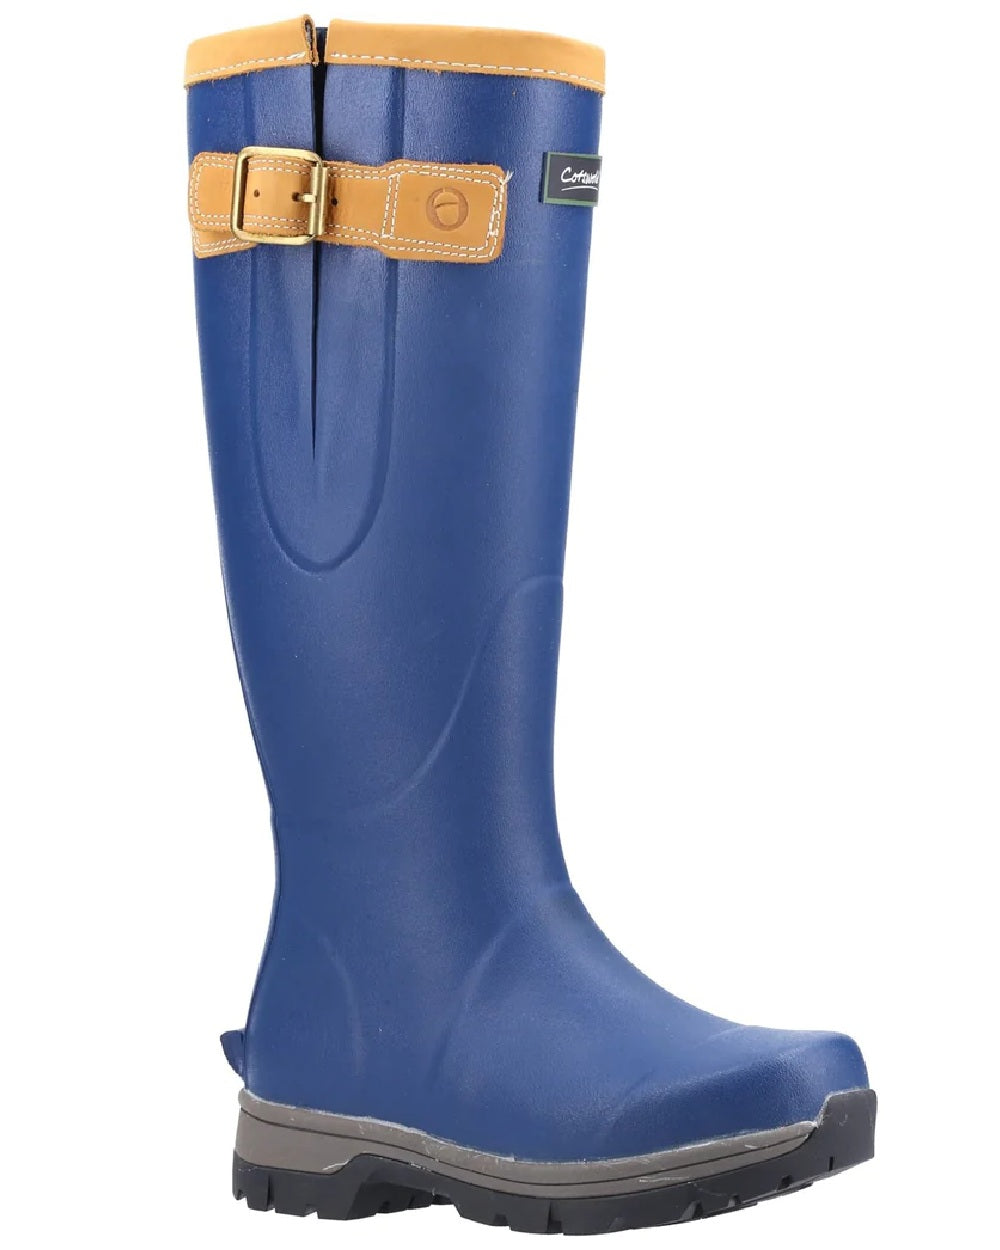 Cotswold Stratus Wellington Boots in Blue 